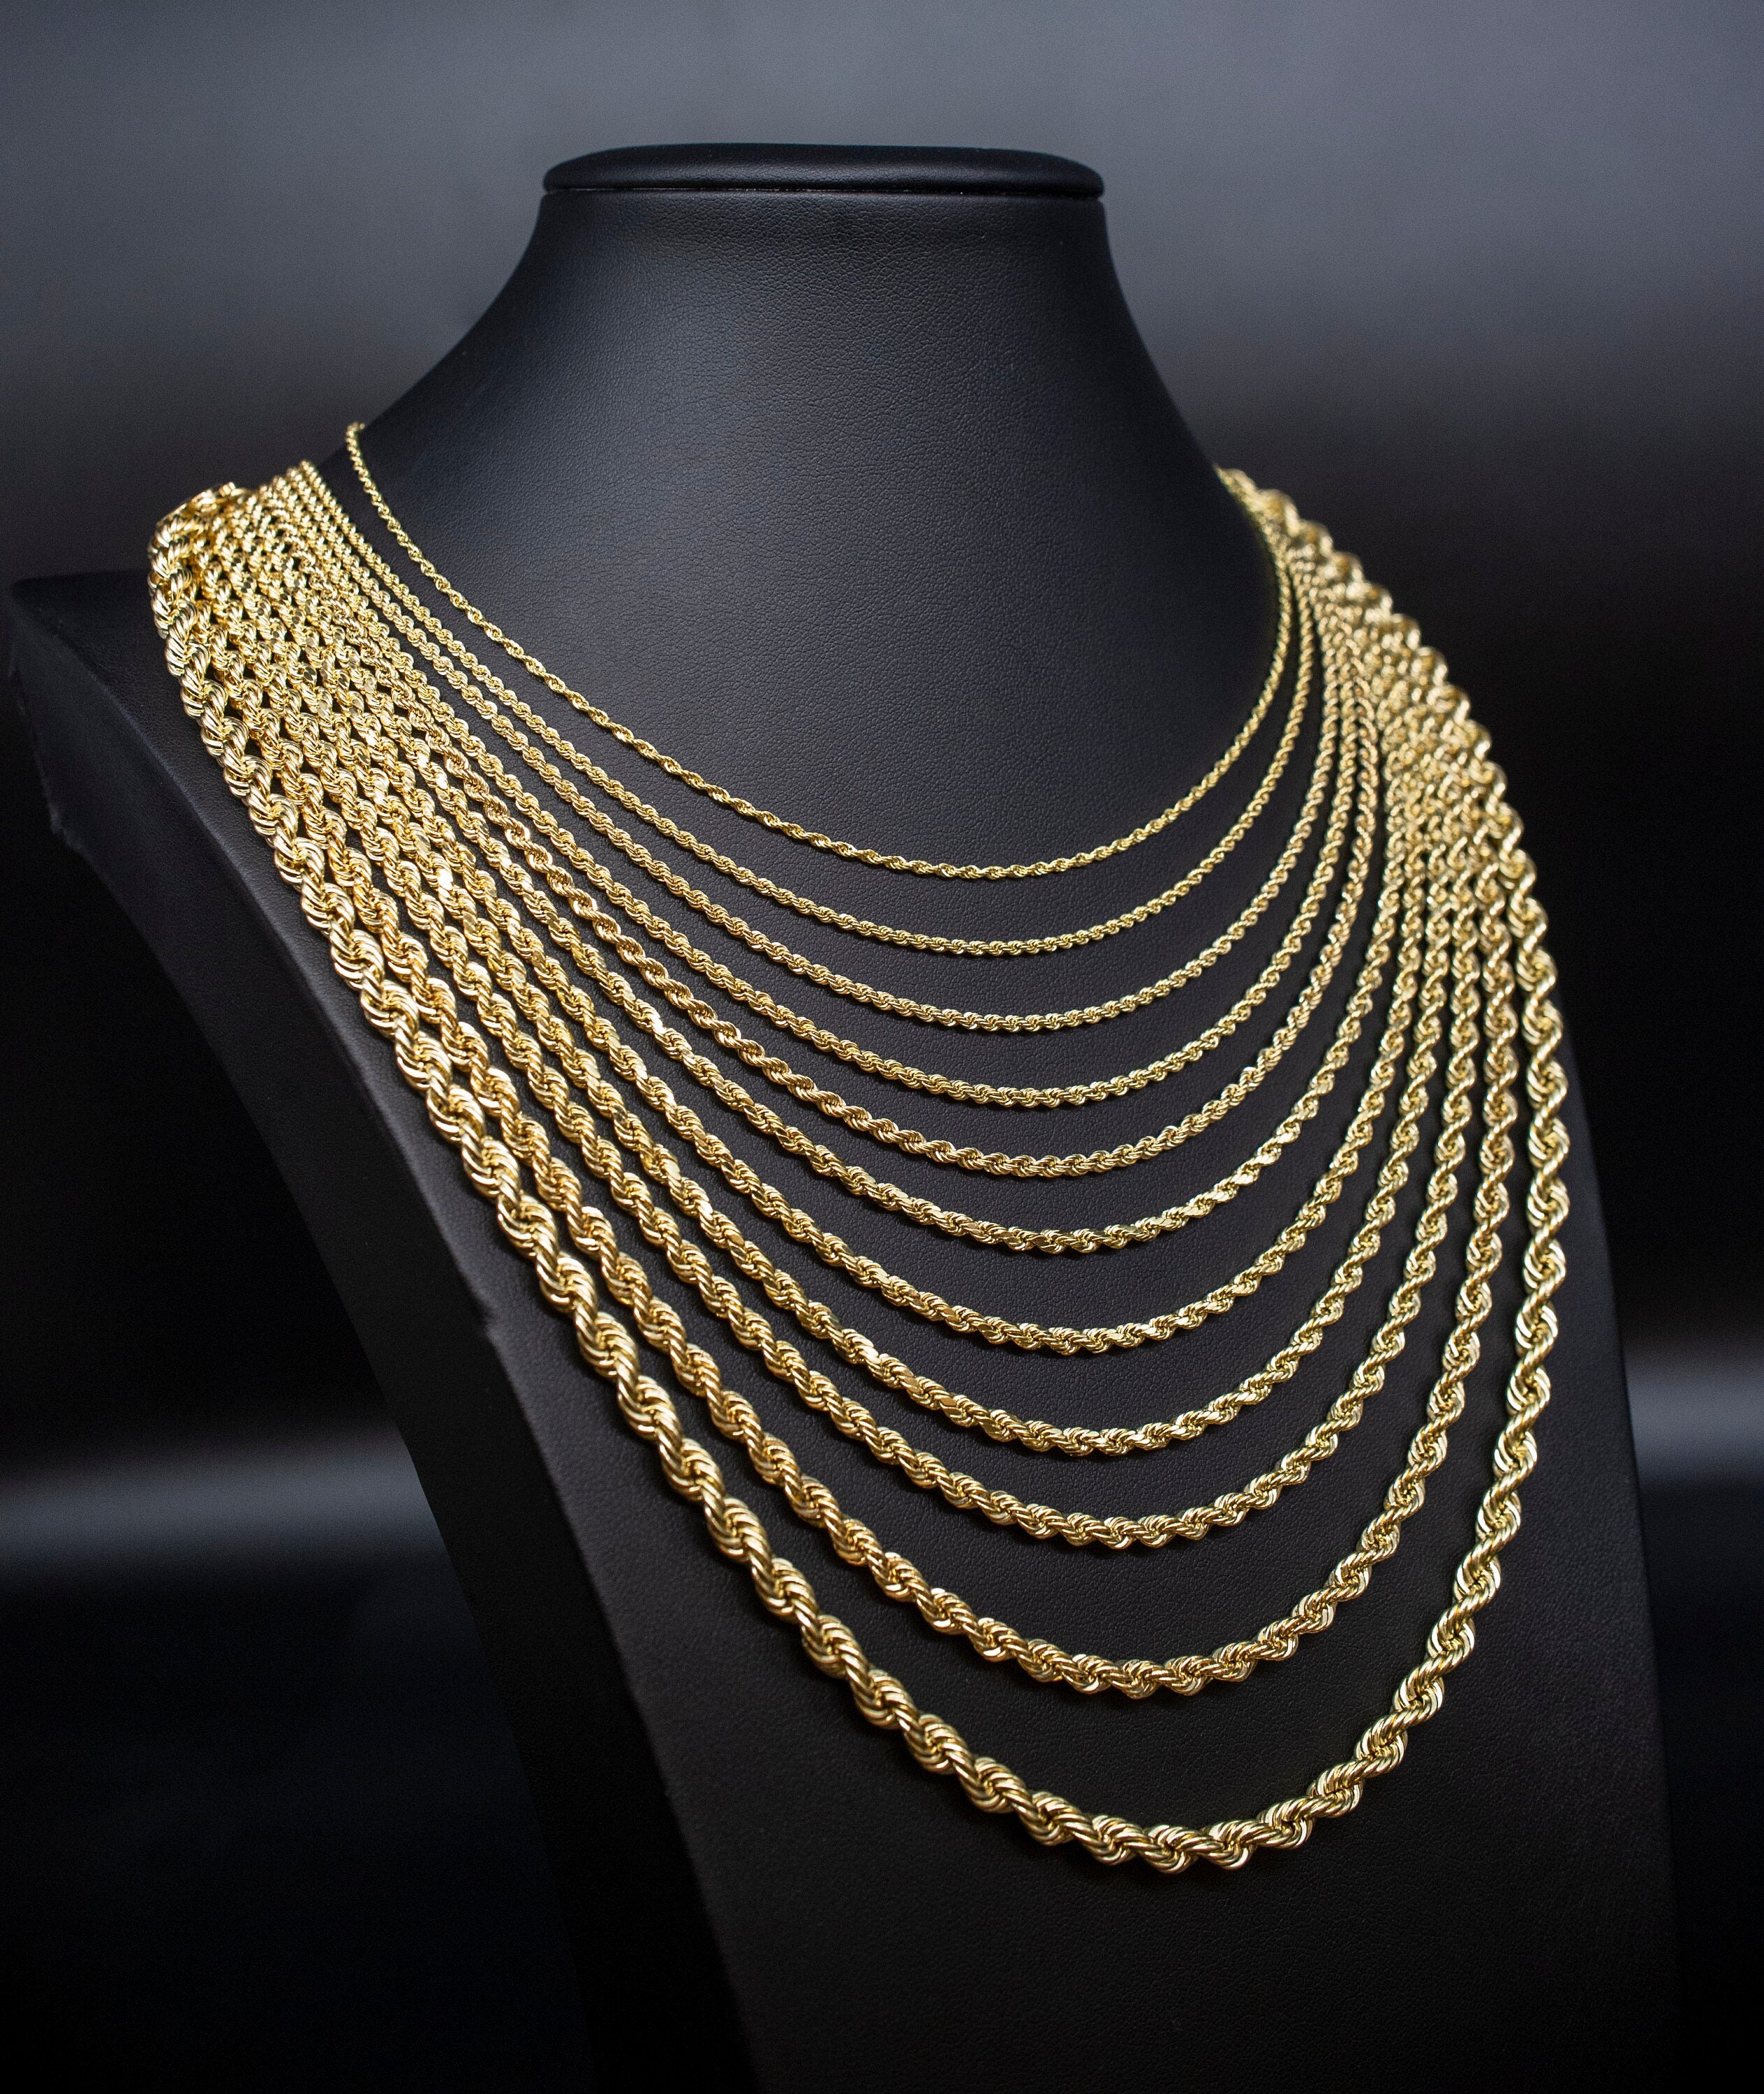 Jiayiqi 2mm-7mm Rope Chain Necklace Stainless Steel Never Fade